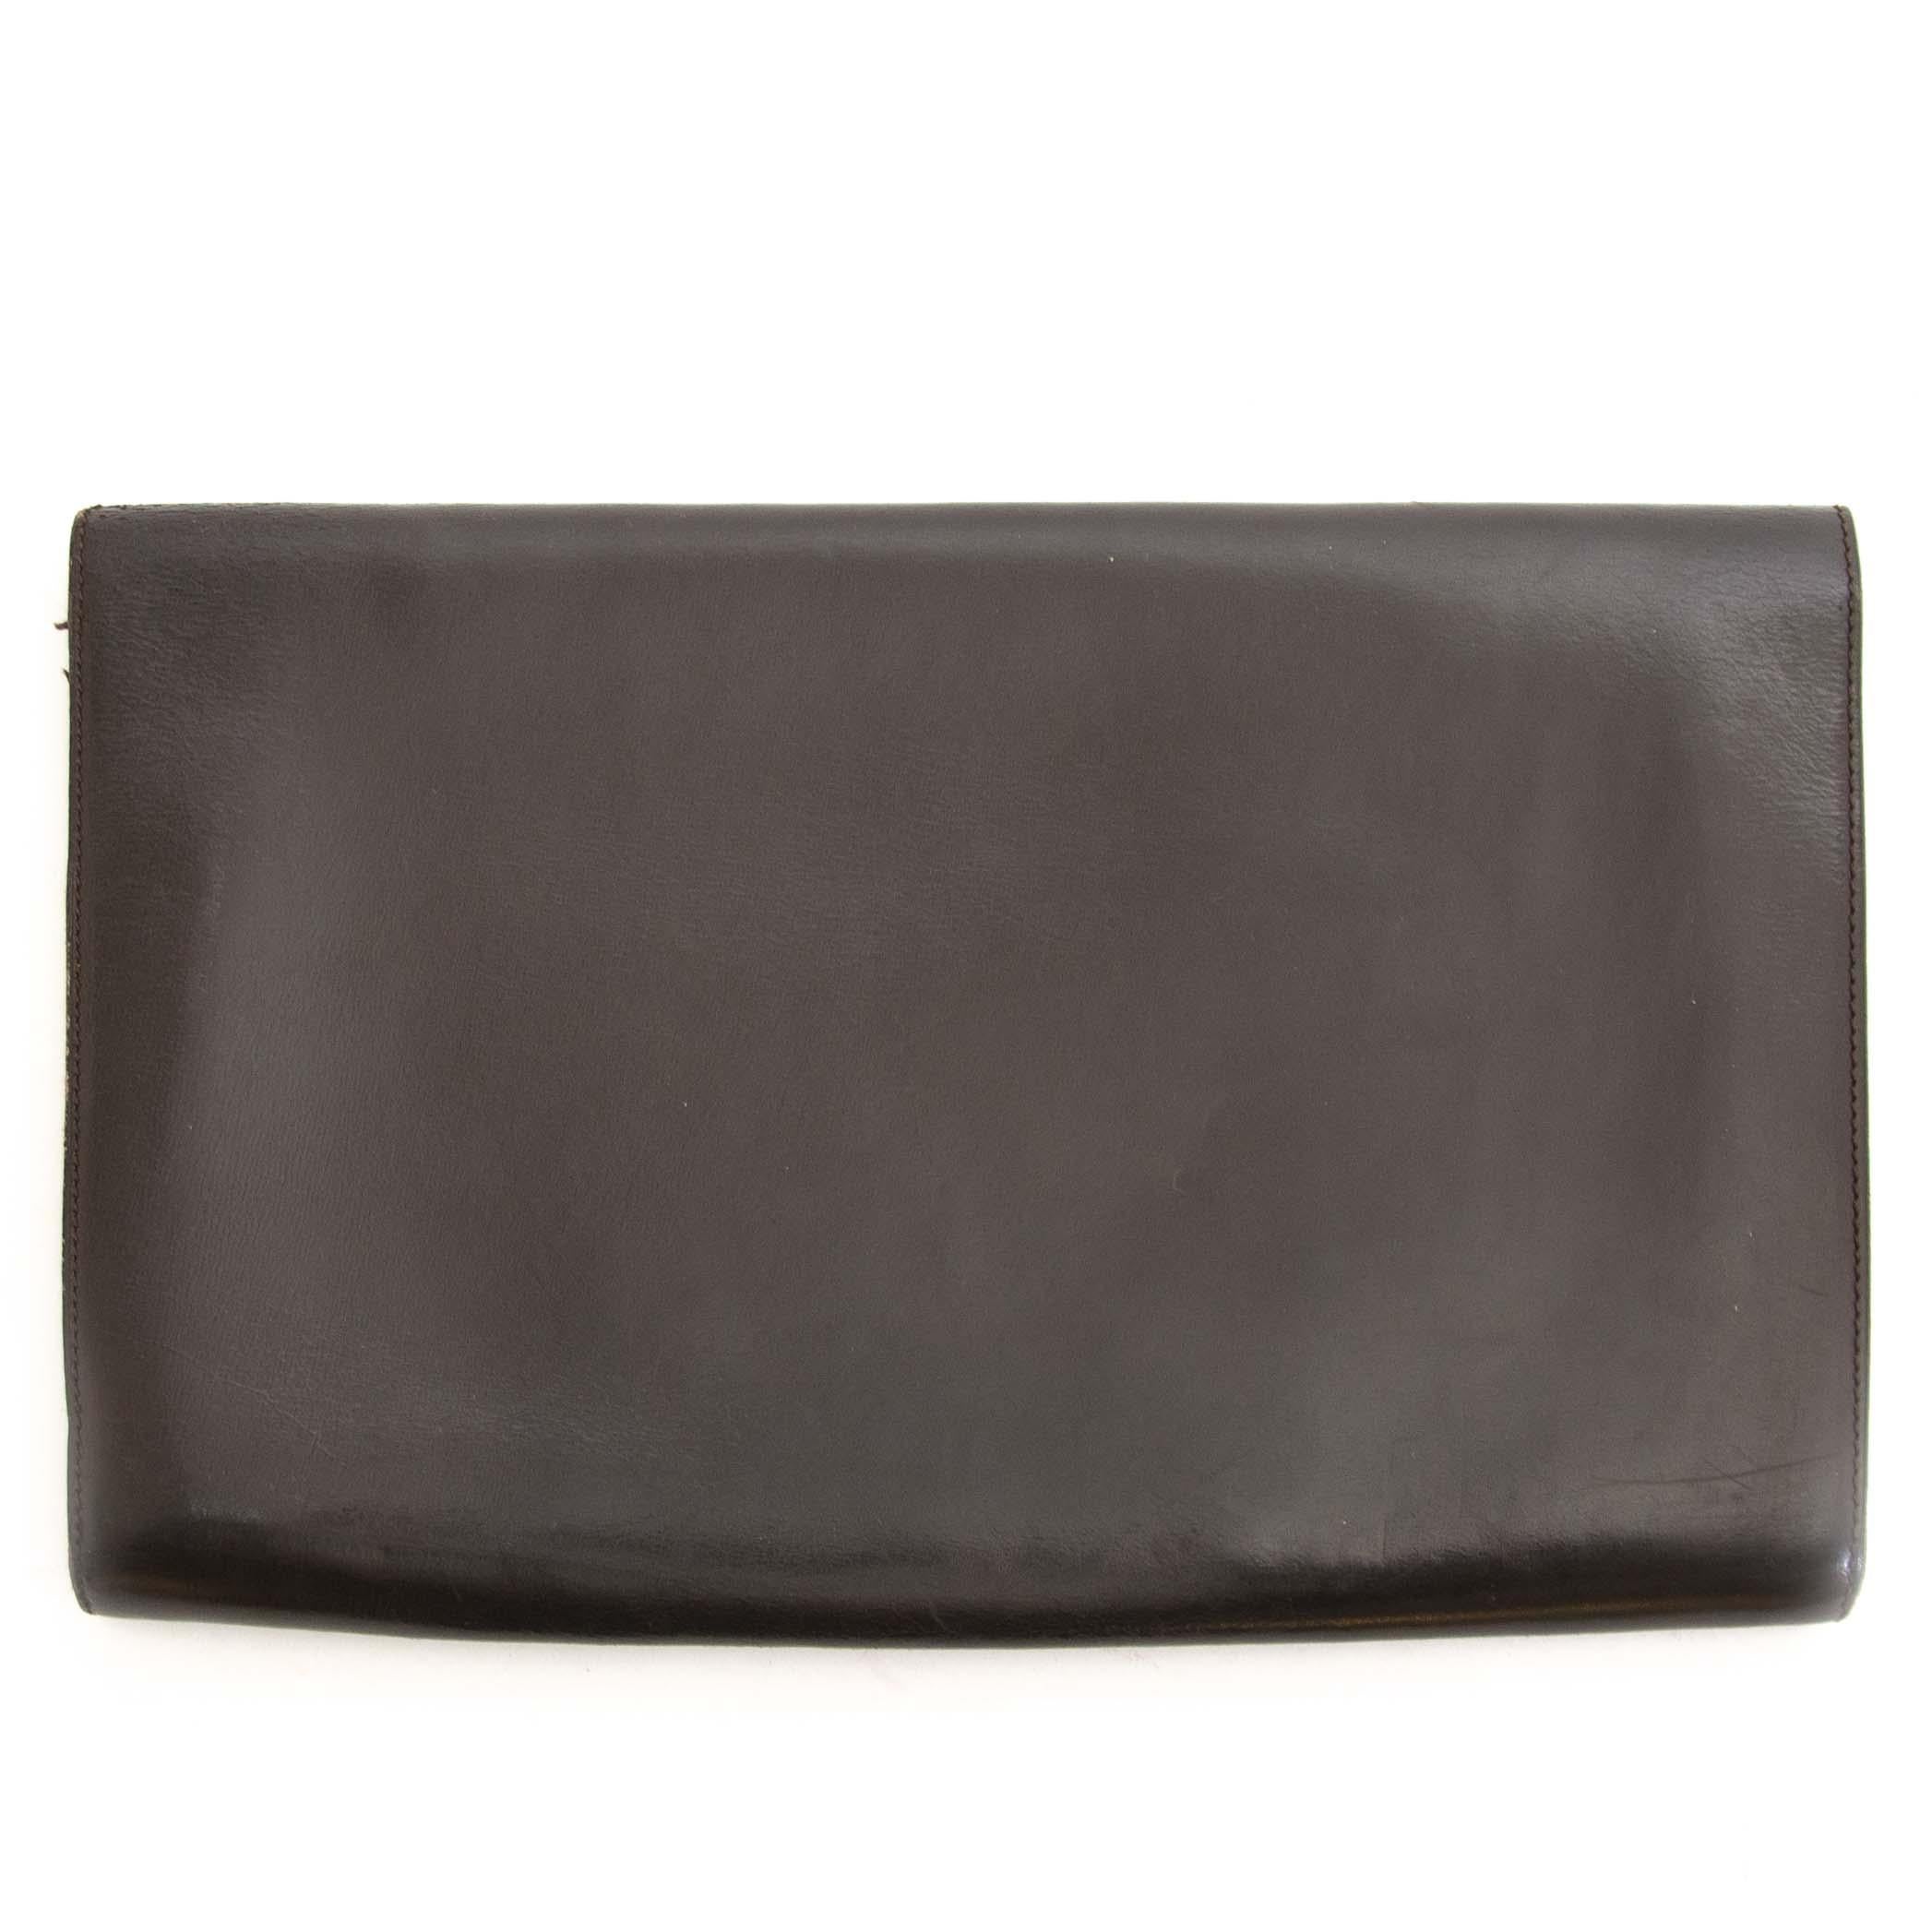 Preloved Condition

Delvaux Dark Brown Leather Clutch

This Delvaux dark brown clutch is a very classic musthave to combine for a more casual chic look. The clutch has a point formed flap to close the bag. The interior is one open space, very easy